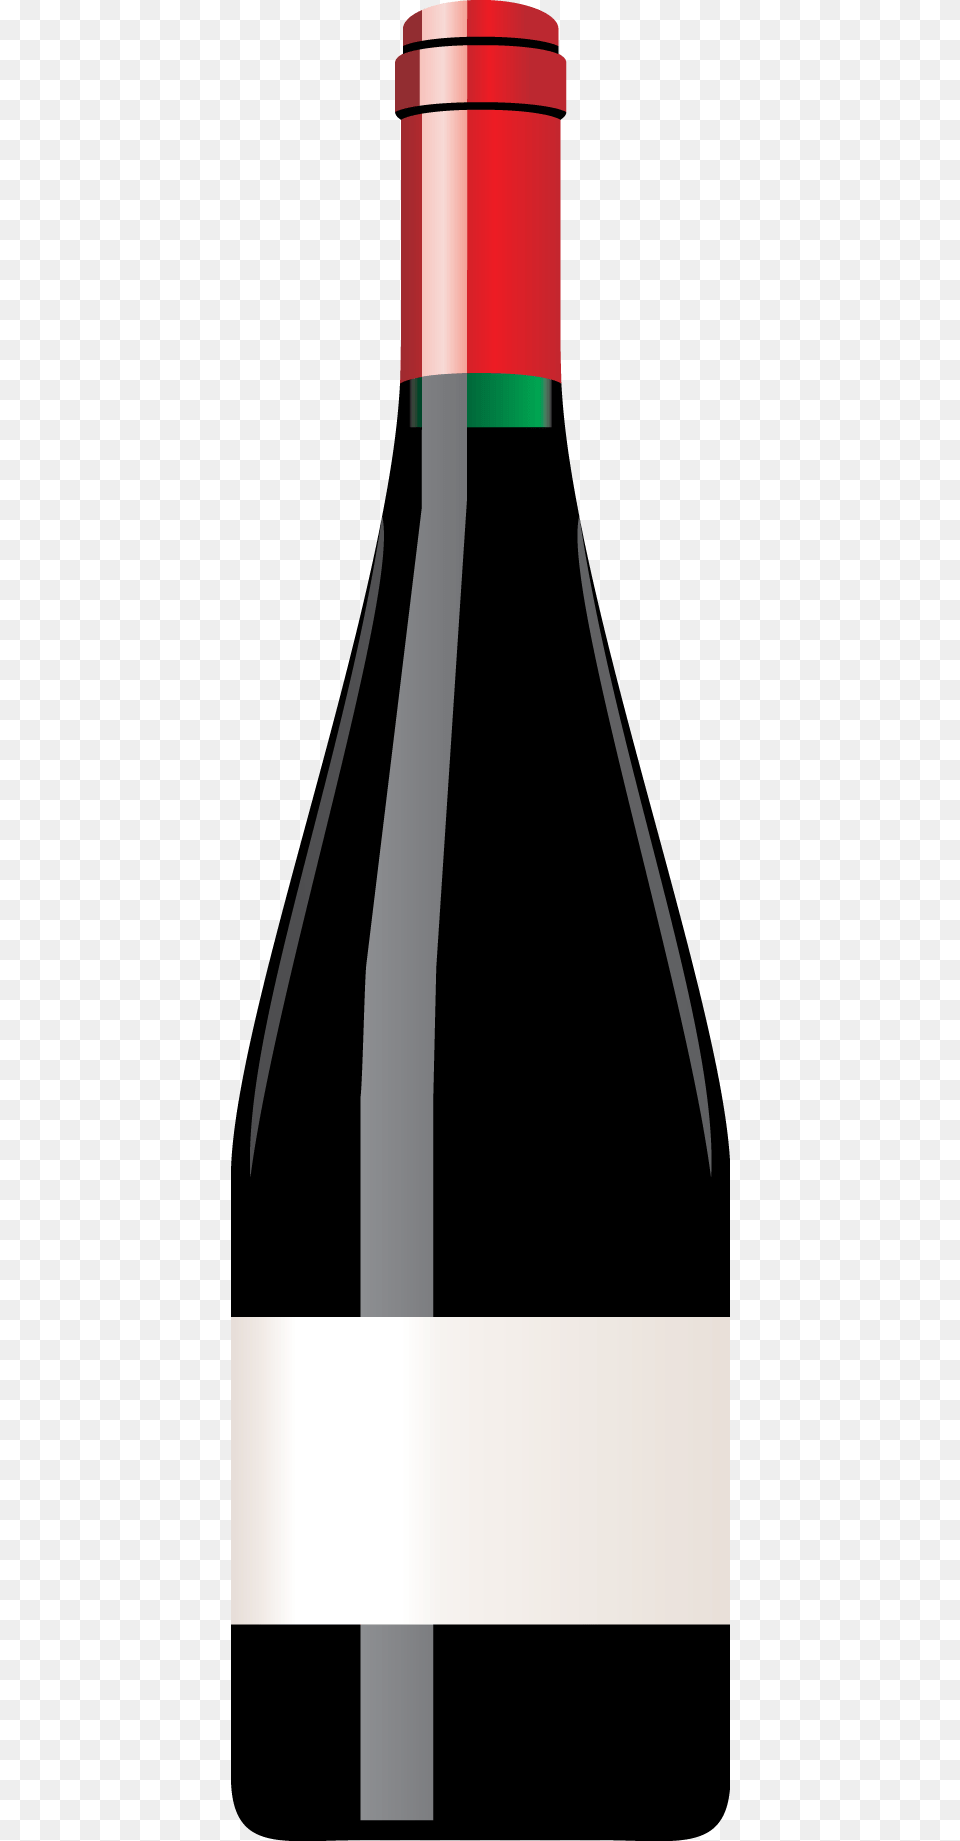 Bottle Of Wine Clipart, Alcohol, Beverage, Liquor, Red Wine Free Transparent Png